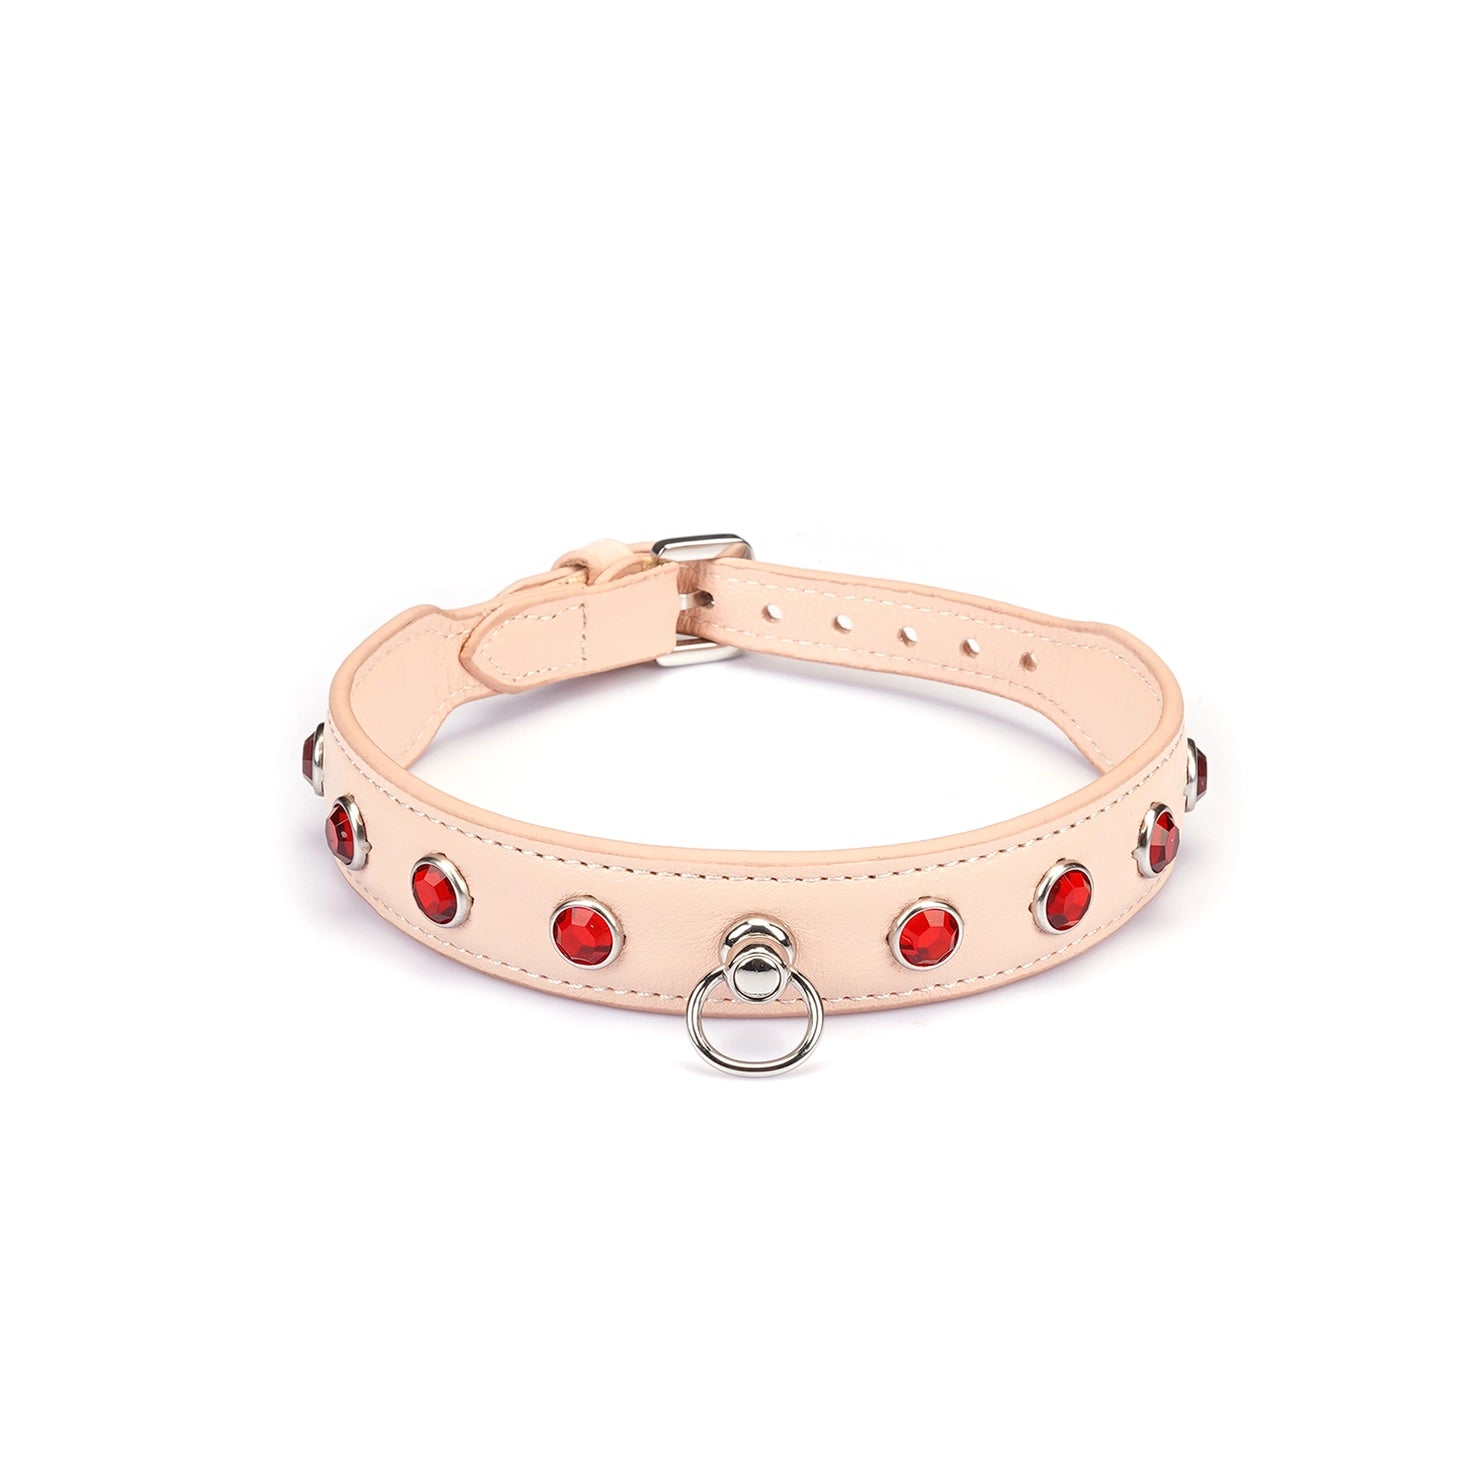 Pink Premium Leather Choker with Gemstones by Liebe Seele